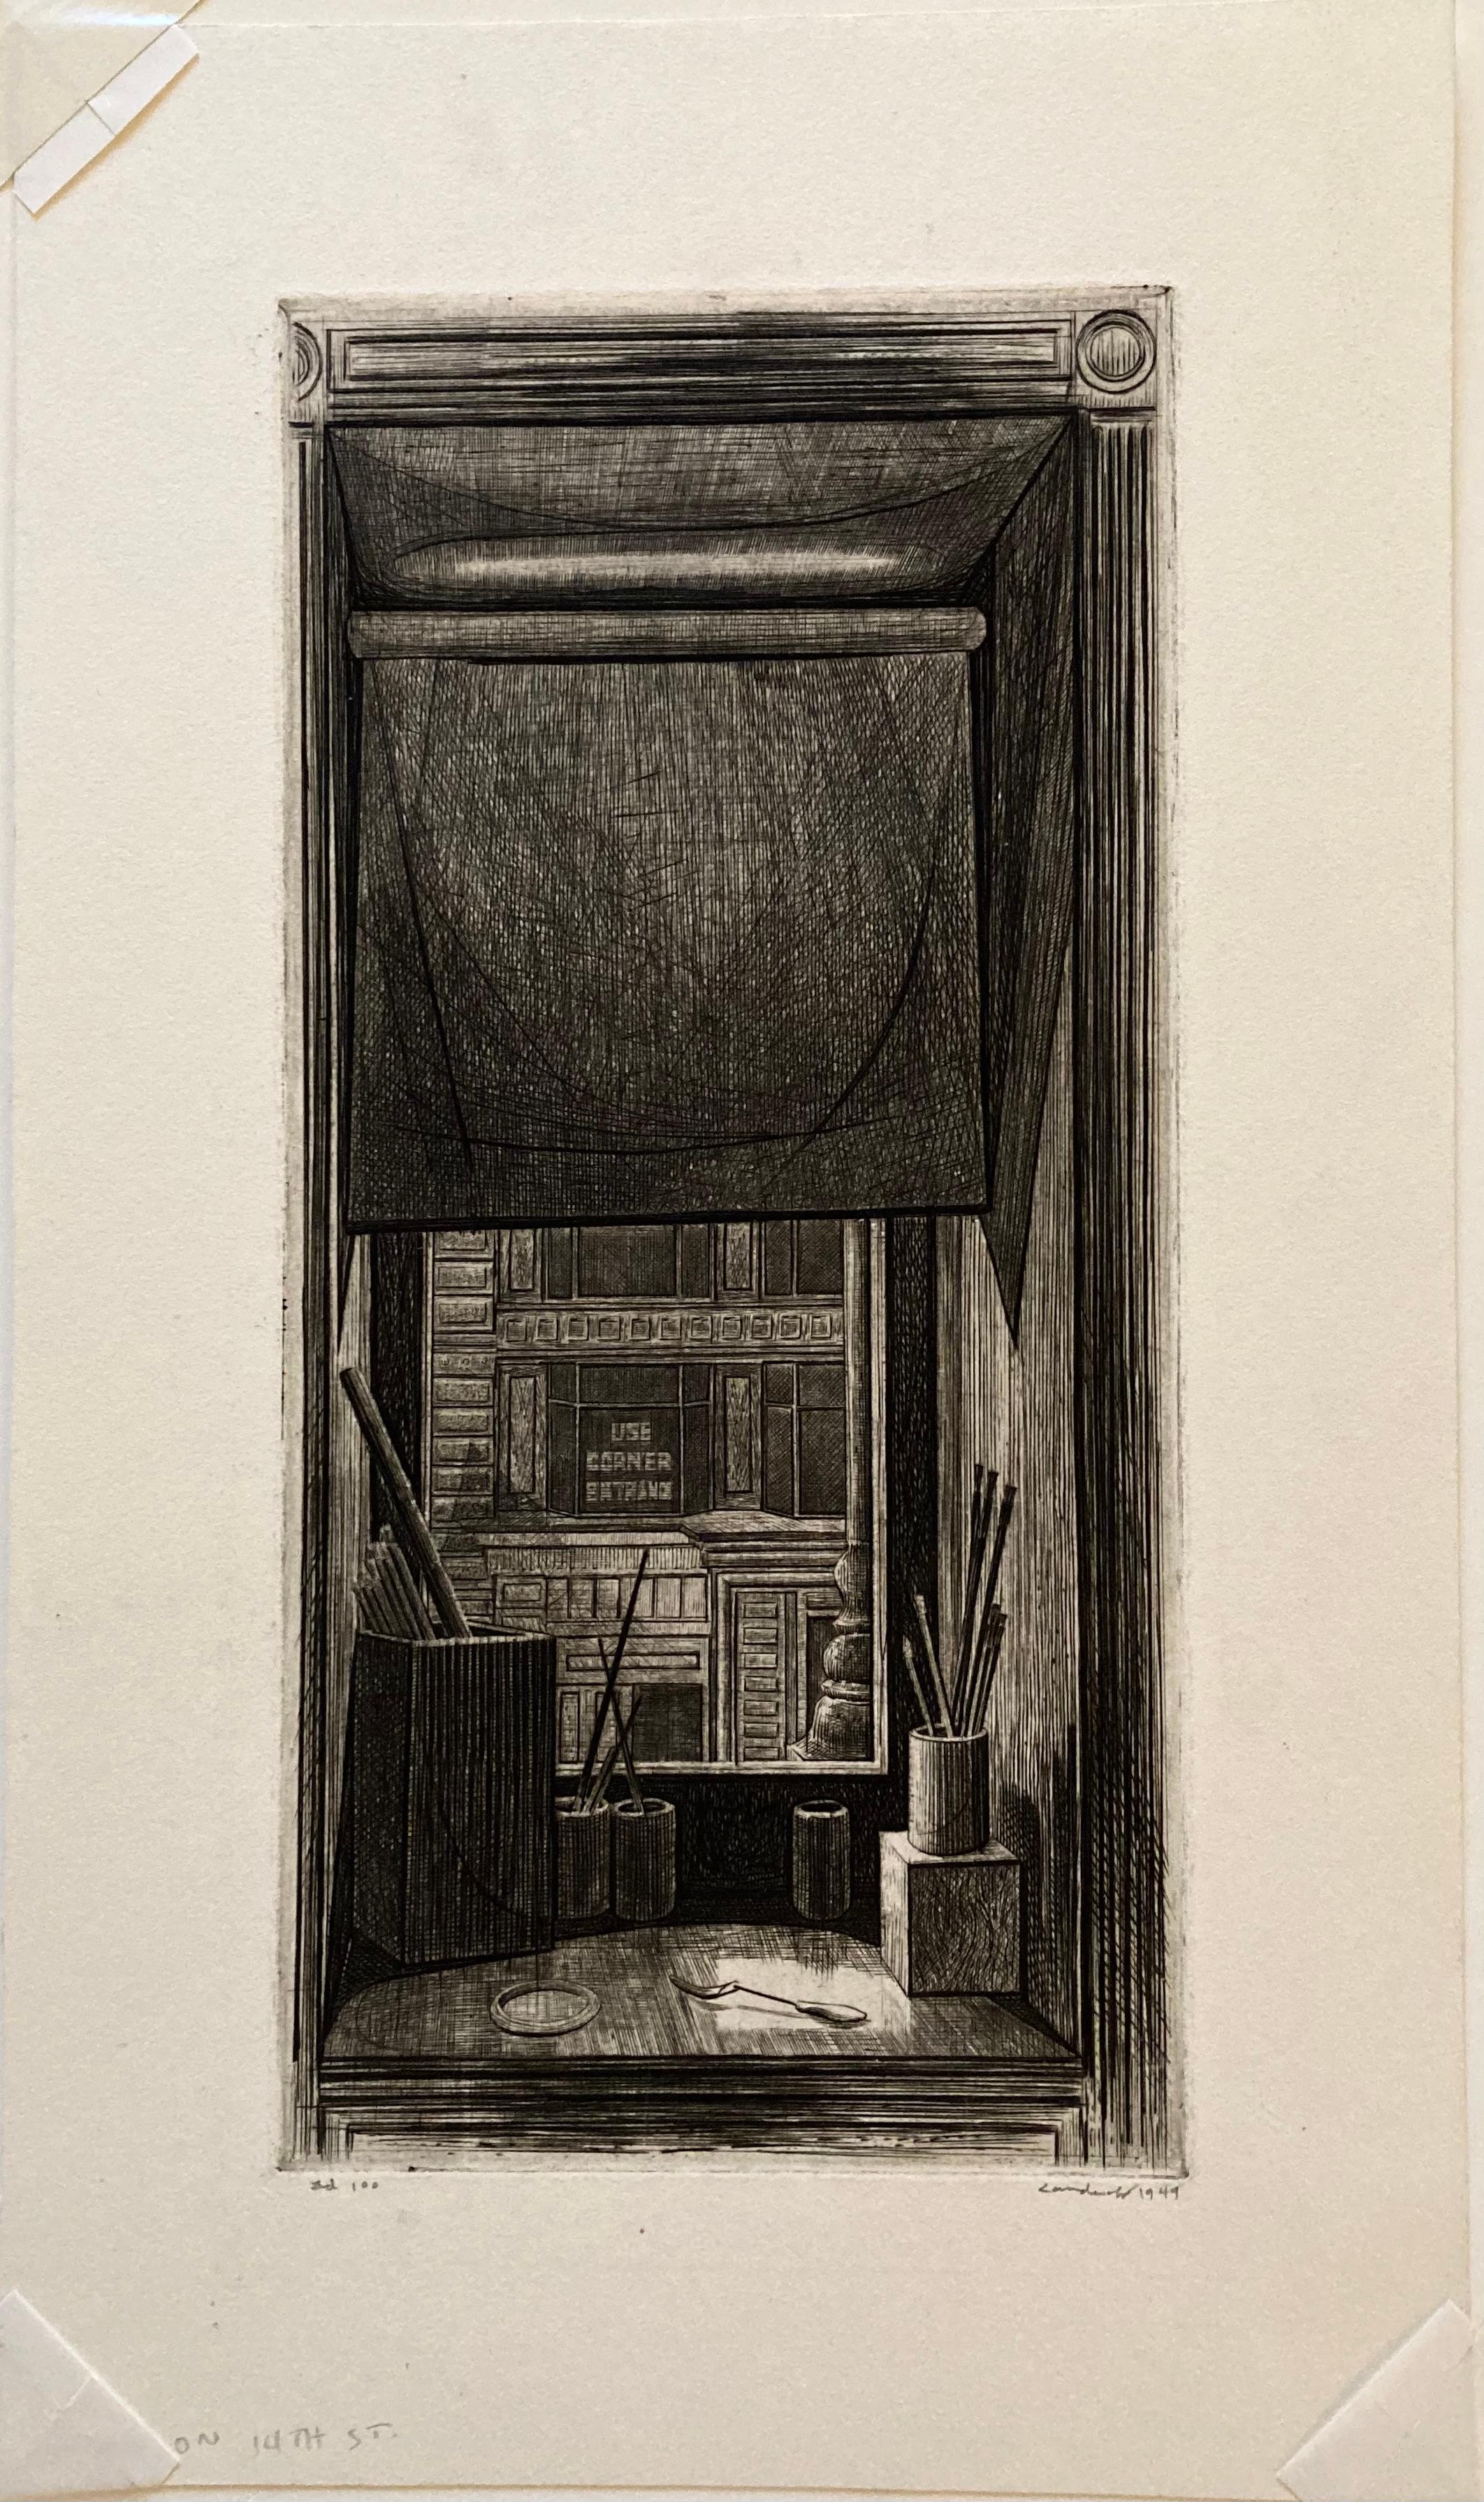 The reference number on this work is Kraeft 103. It's from an edition of 100 and is signed, dated, and numbered, in pencil.

Always an intaglio printmaker, Landeck switched from a more atmospheric drypoint technique to engraving while working at